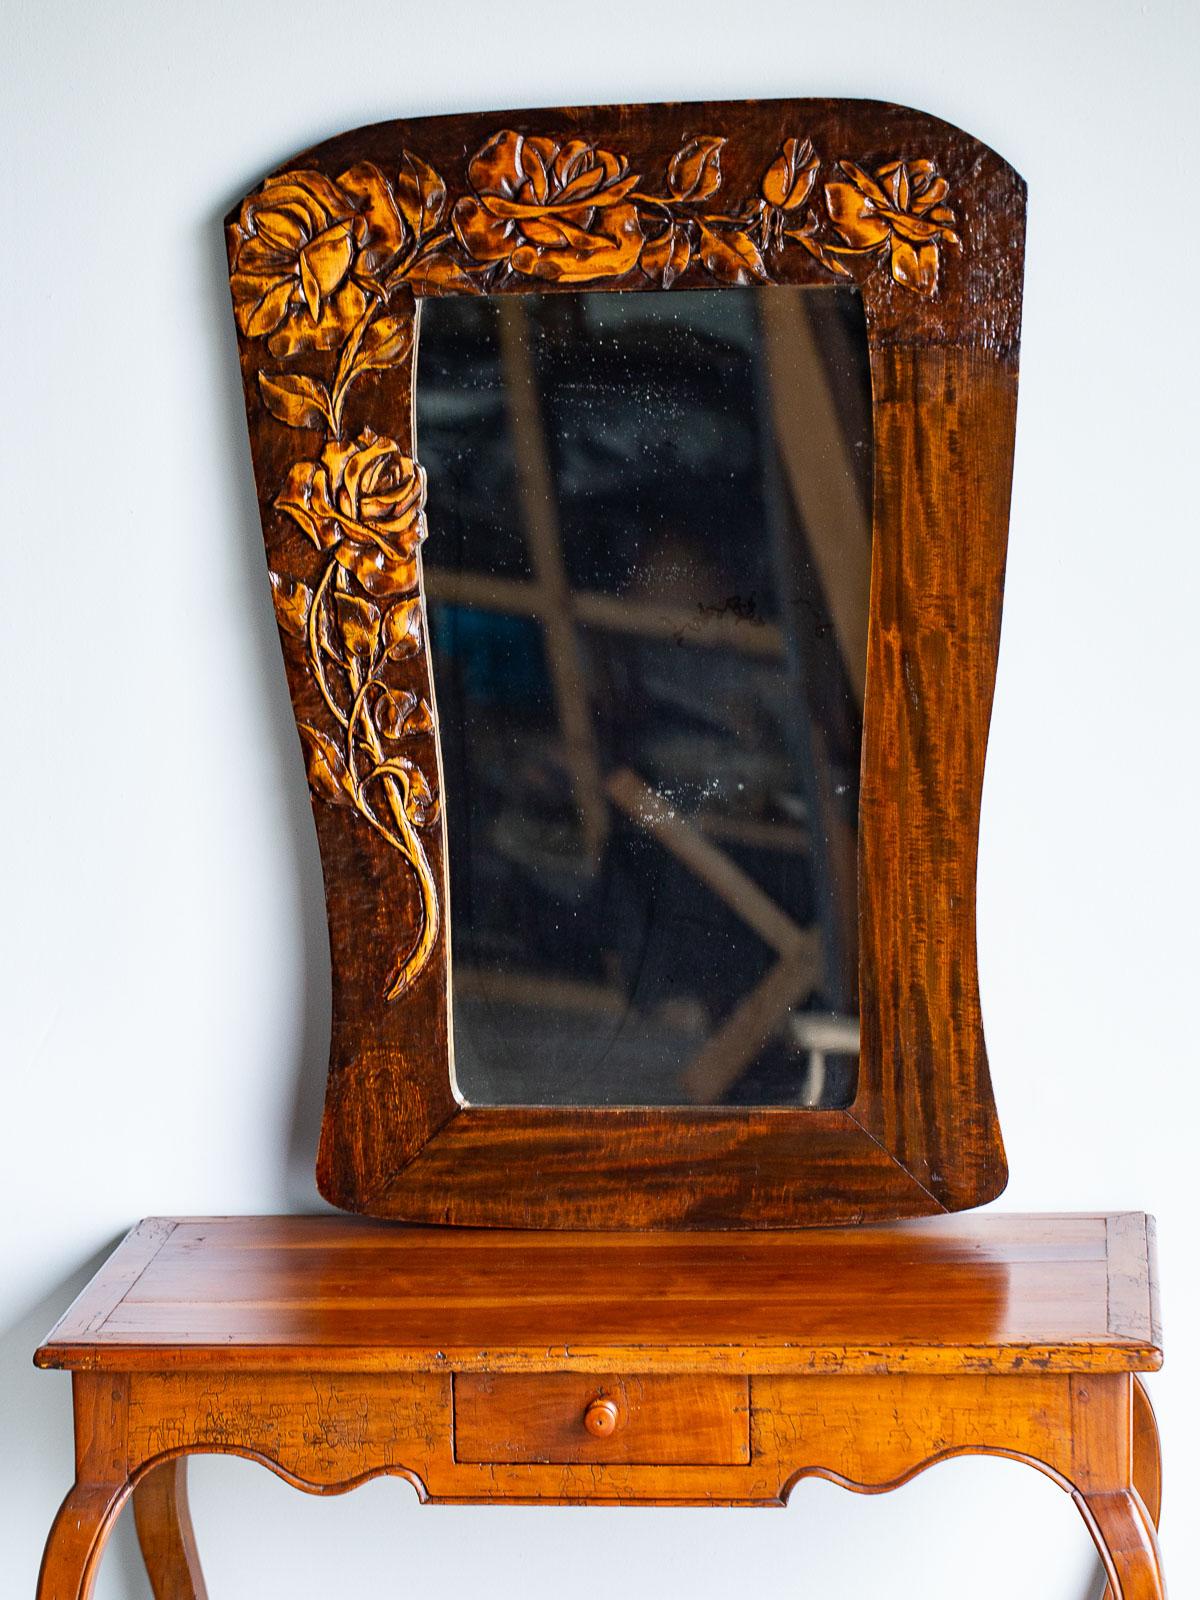 This vintage French Art Nouveau period mirror circa 1910 features an asymmetrical arrangement of hand carved climbing roses. The unique shape of the mirror reflects the Art Nouveau aesthetic of asymmetry and a fascination with natural forms. Please